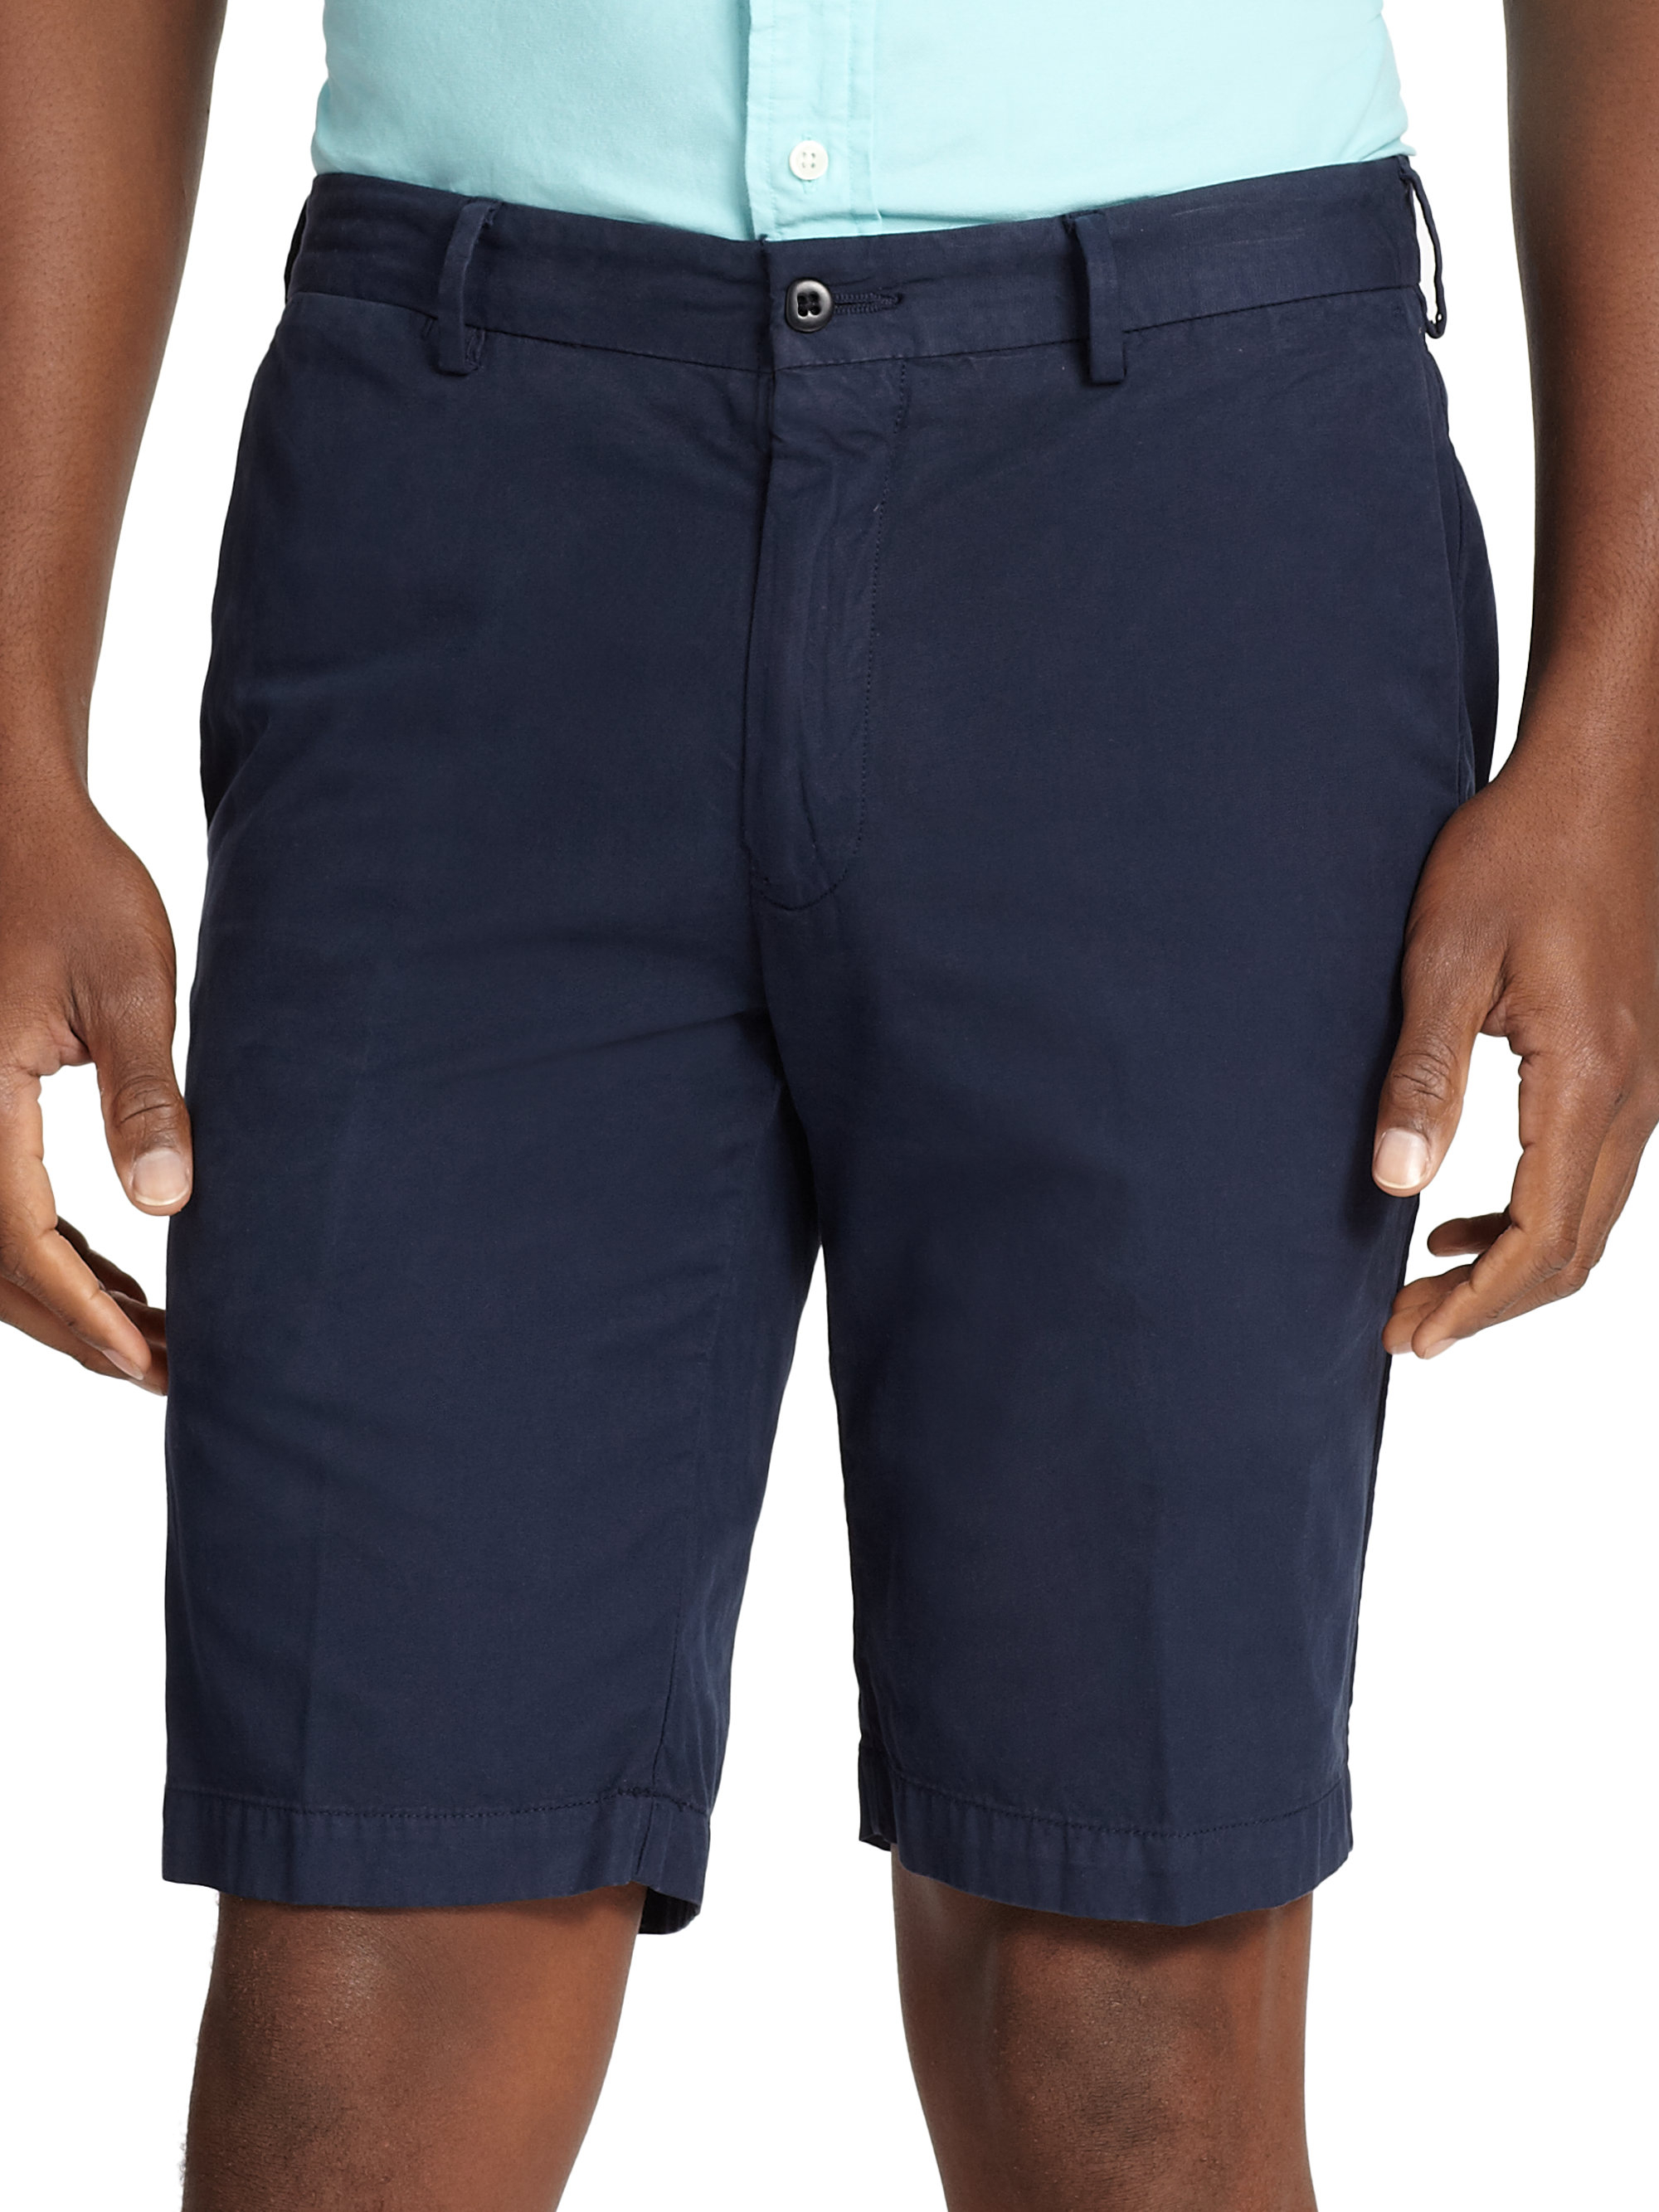 Lyst - Polo Ralph Lauren Straight-fit Newport Shorts in Blue for Men